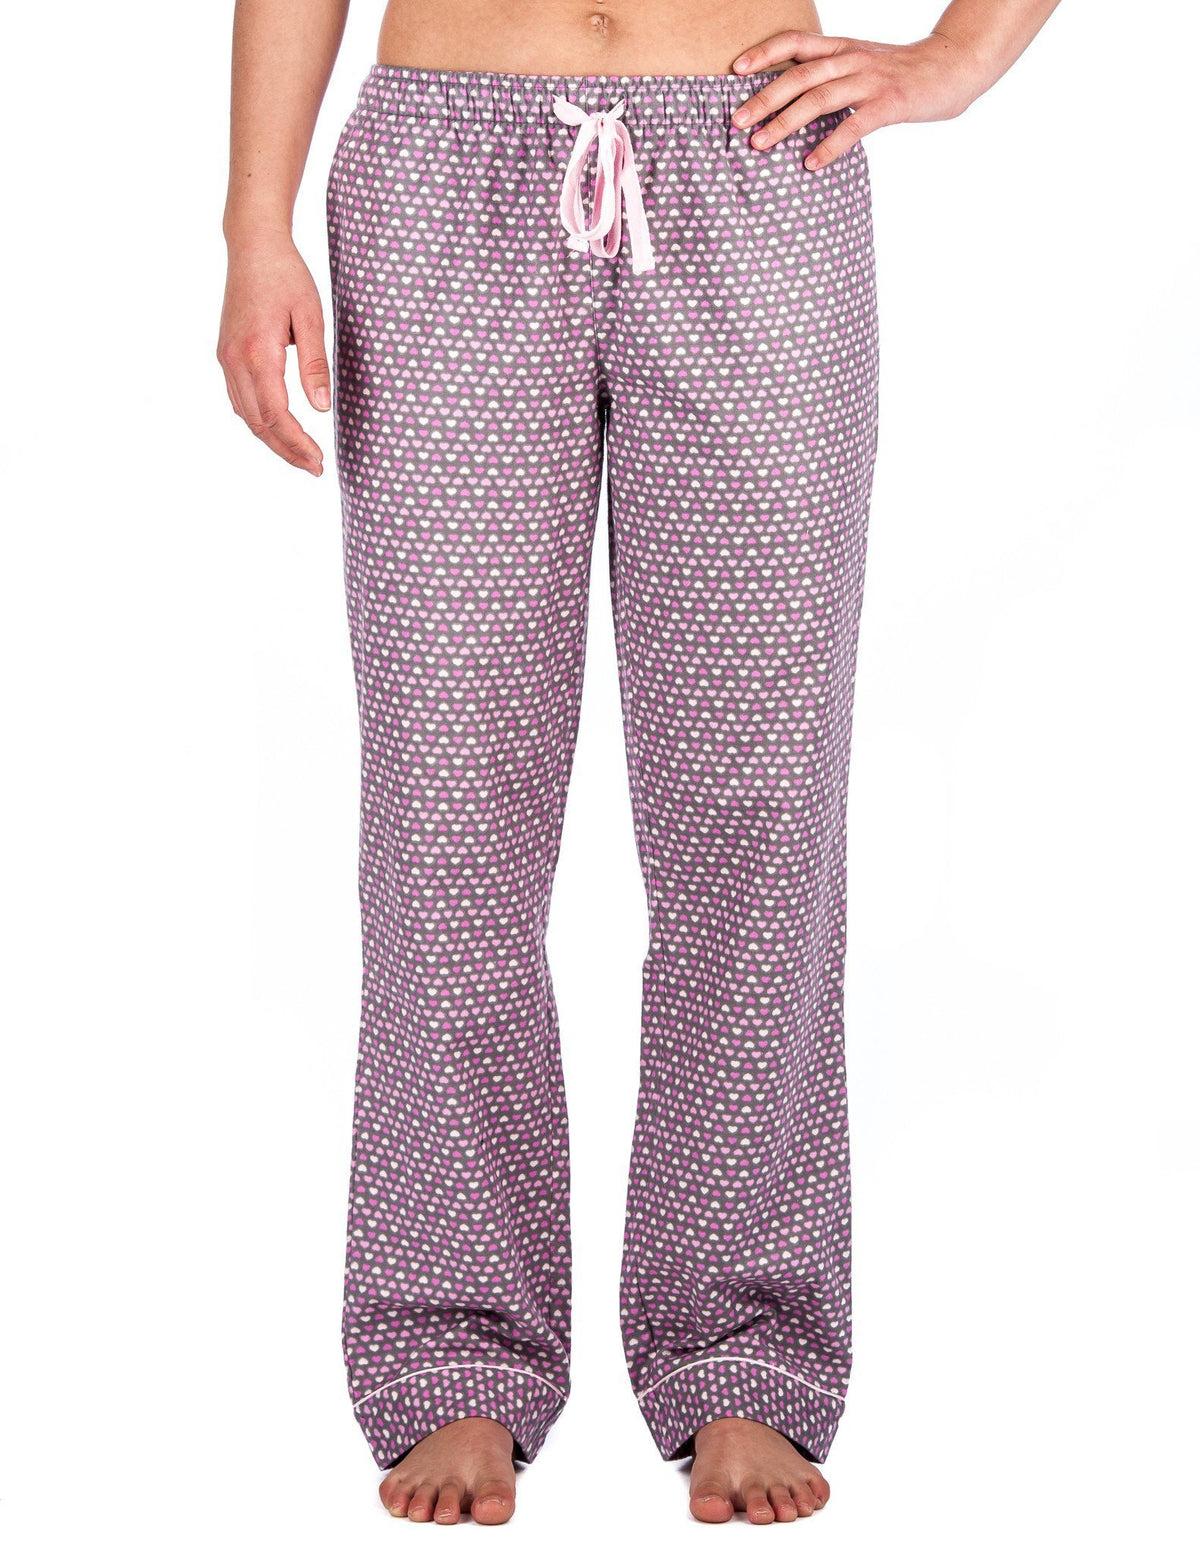 Relaxed Fit Womens 100% Cotton Flannel Lounge Pants - Hearts Pink